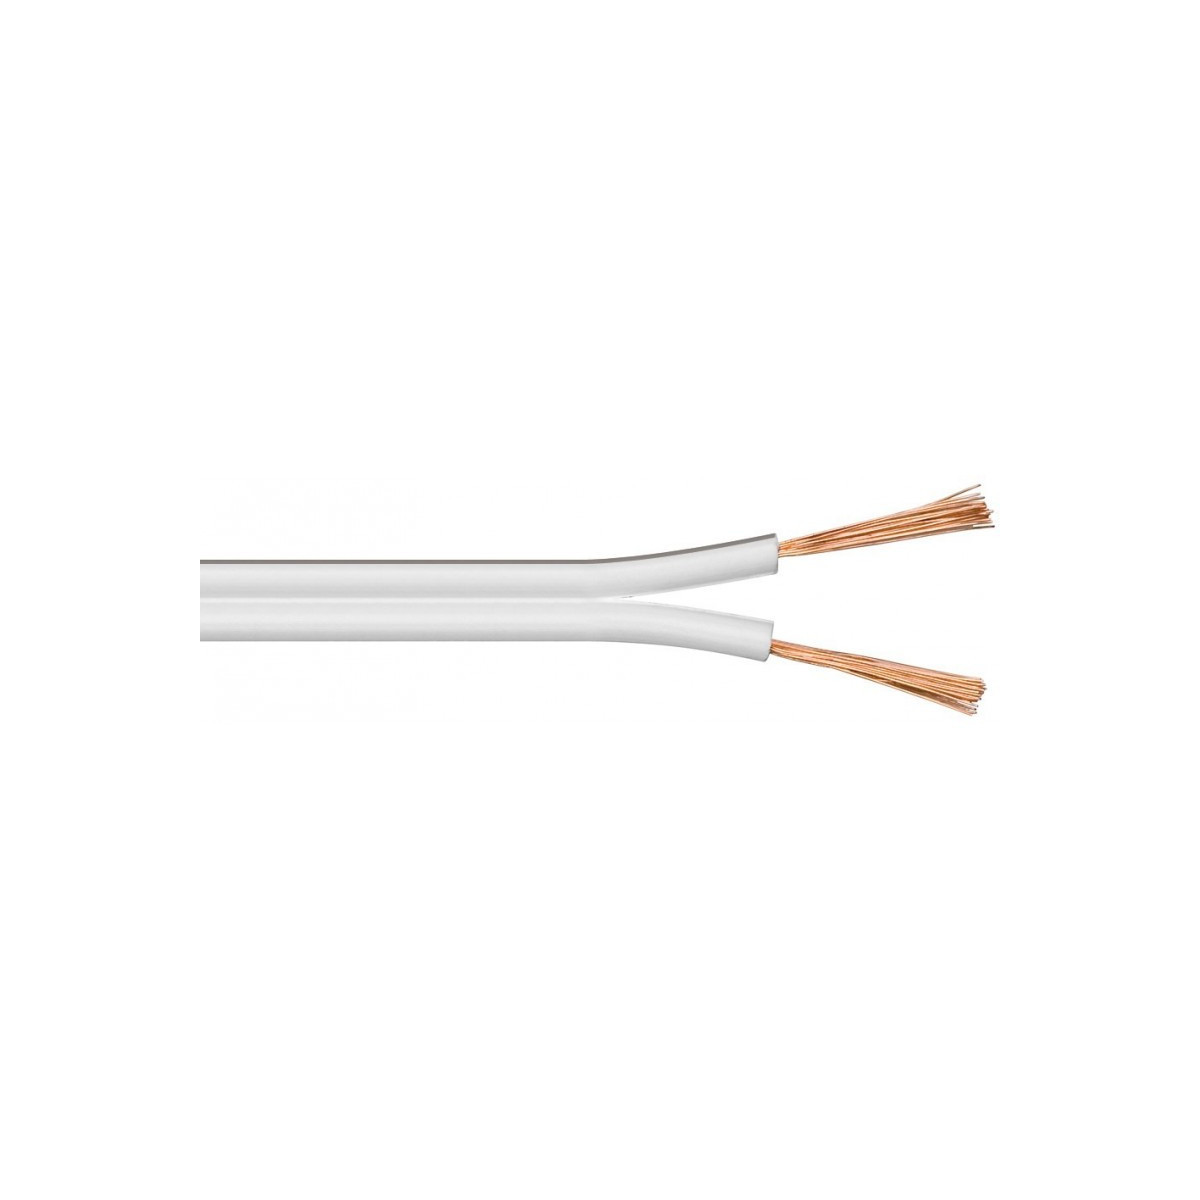 Cable paralelo blanco 2x0,5mm